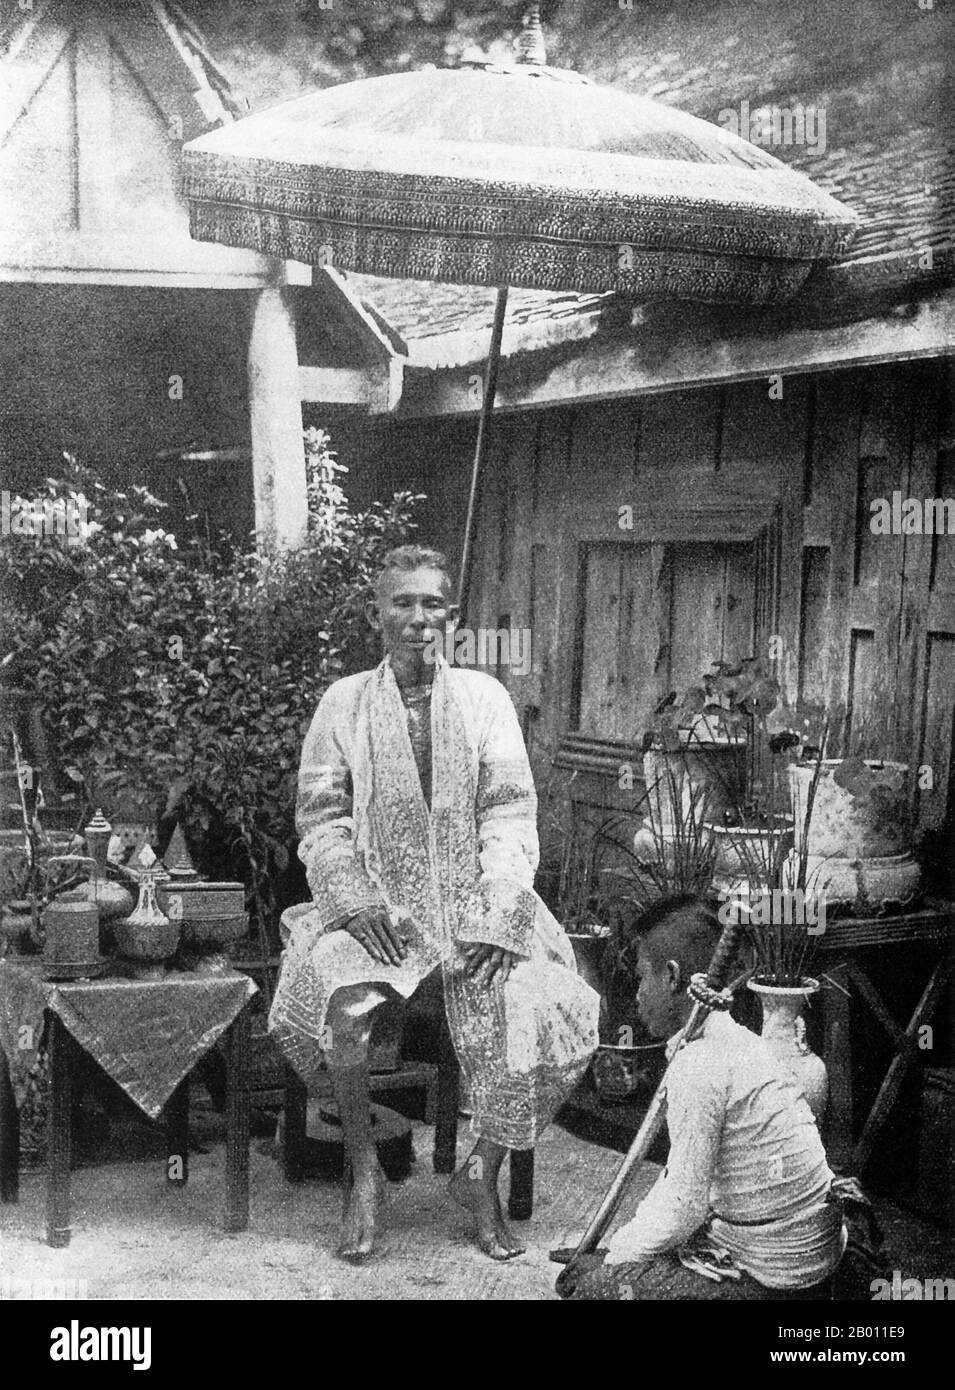 Thailand: Dressed in a gold embroidered robe, a prince is attended by a servant during the reign of King Mongkut (1851-1868).  Rama IV, known in foreign countries as King Mongkut (1804-1868), was the fourth monarch of Siam under the House of Chakri, and ruled from 1851 to his death in 1868. He was one of the most revered monarchs of the country. Outside of Thailand, he is best-known as the King in the 1951 play and 1956 film The King and I. During his reign, the pressure of Western expansionism was felt for the first time in Siam. Stock Photo